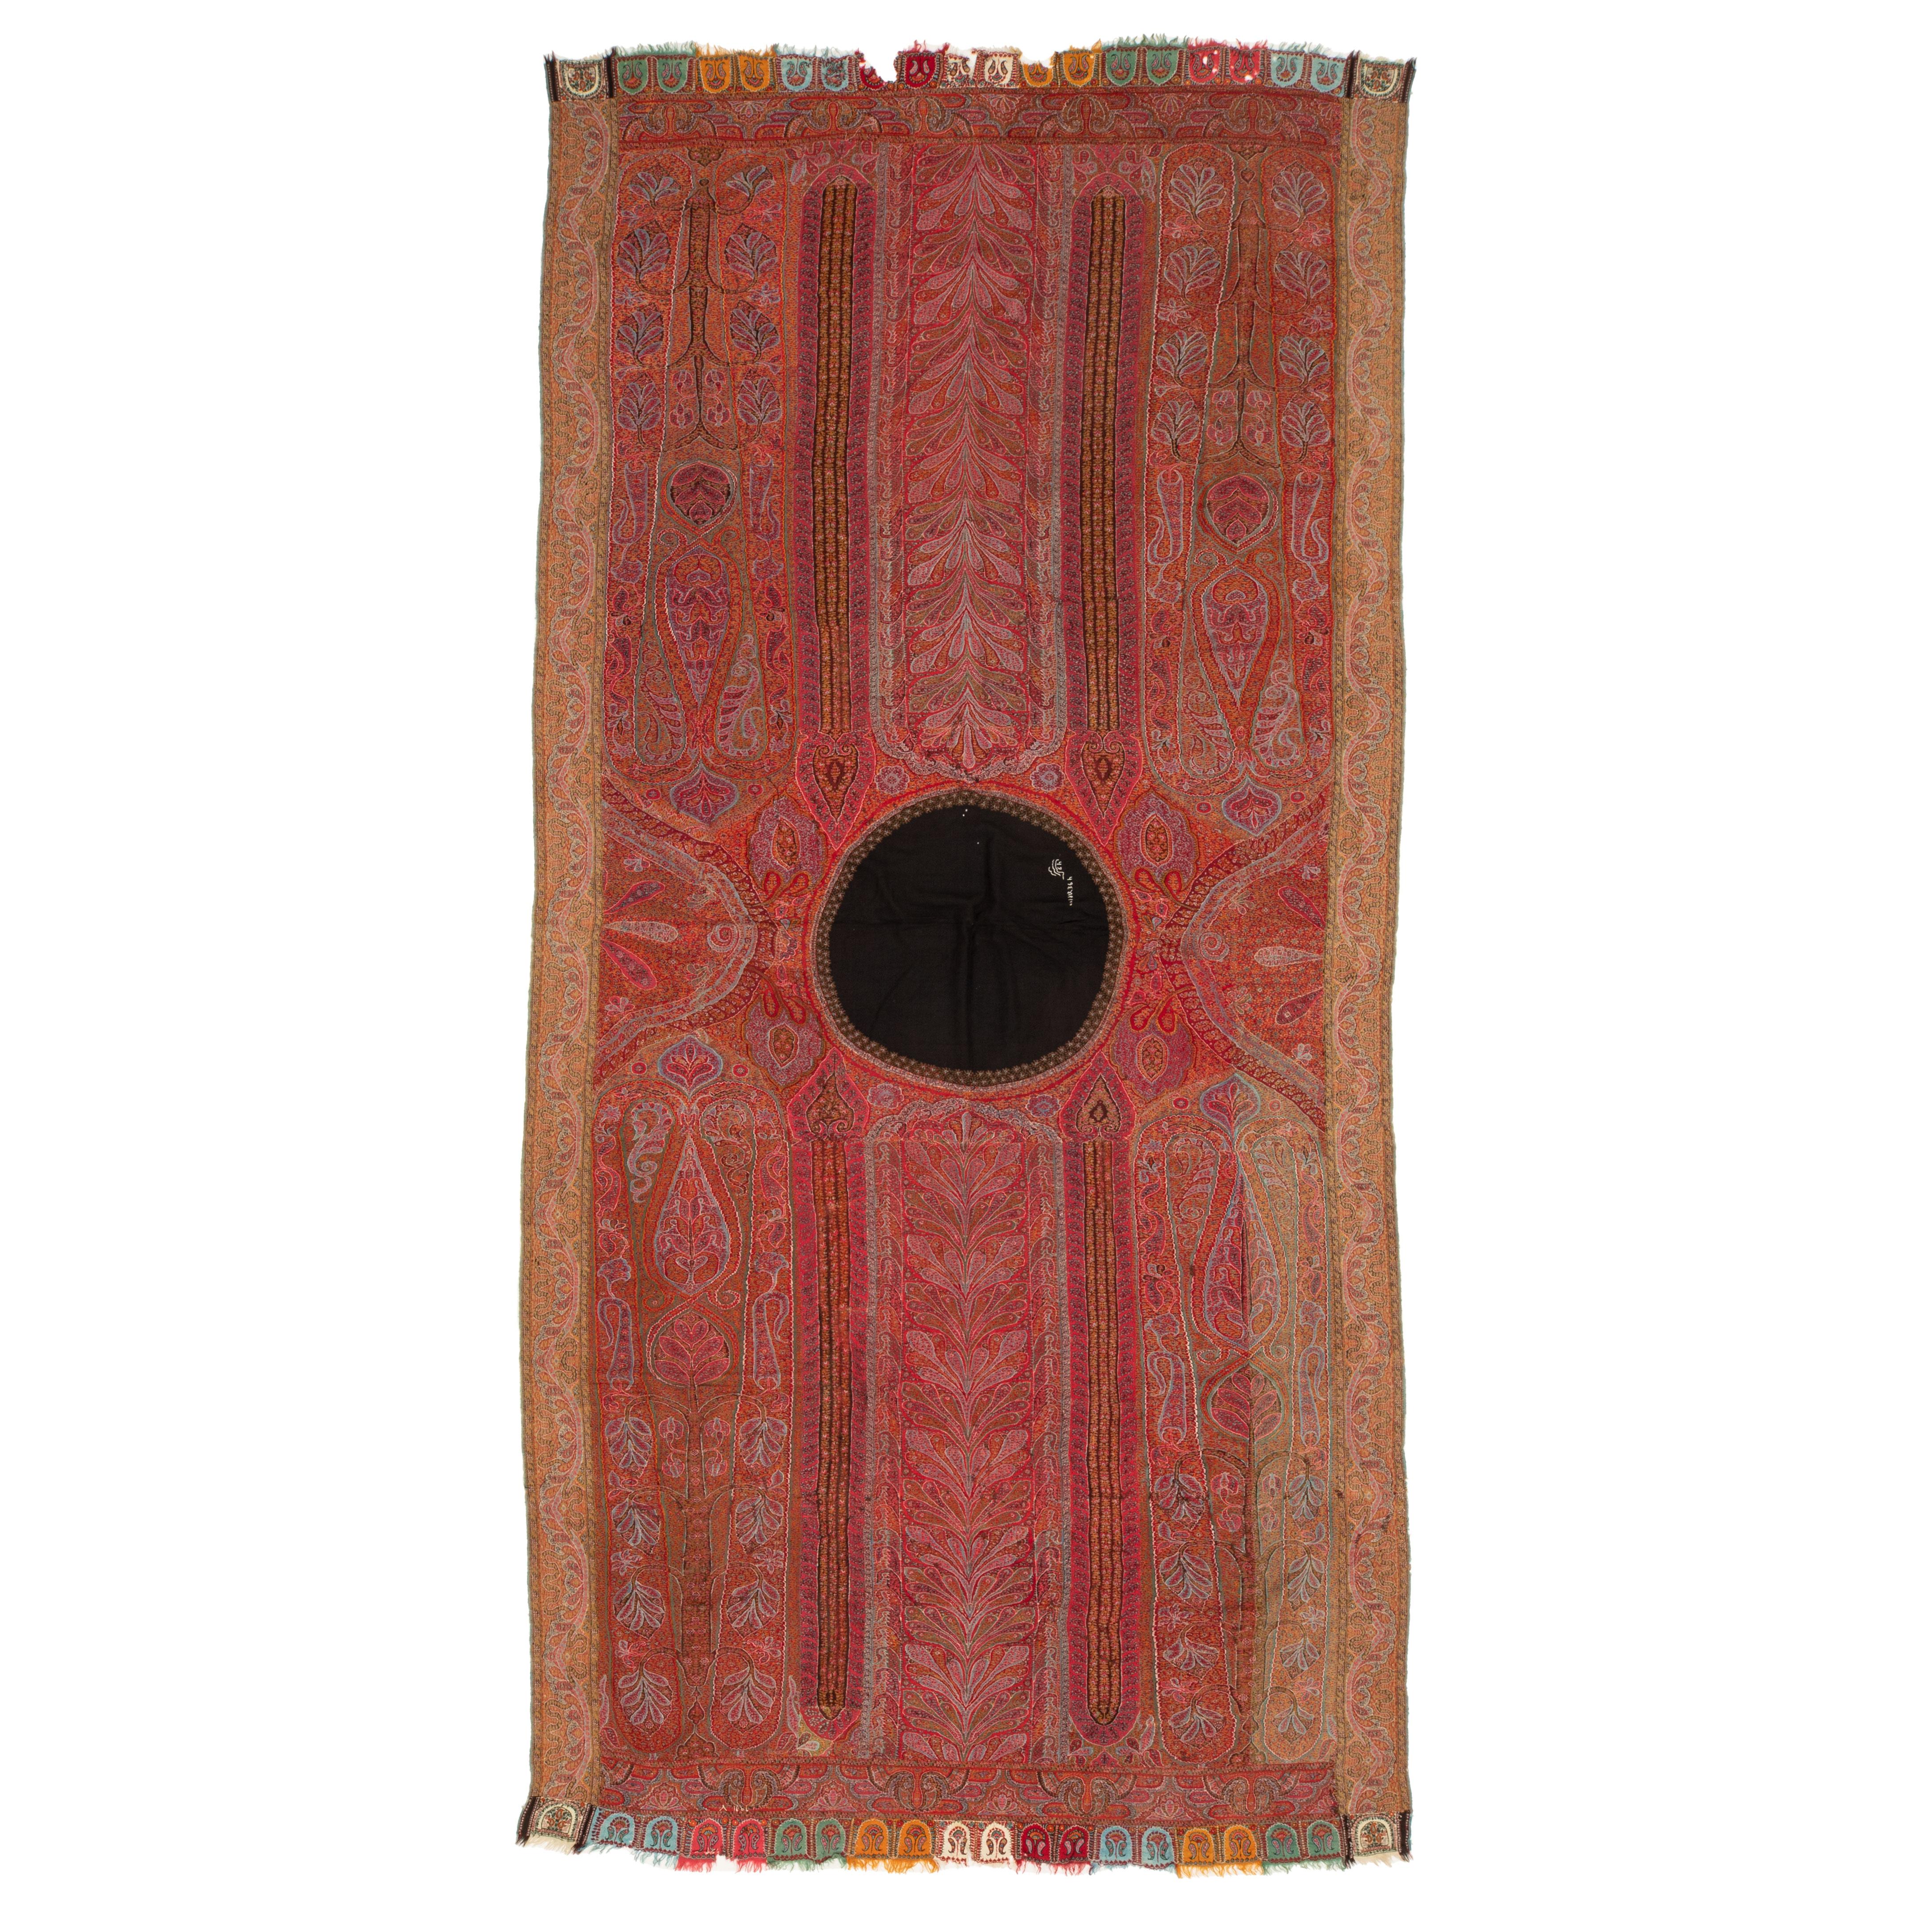 This is a rather large piece with rather good condition. It is pure wool from the mid 19th C. Kashmir, India.